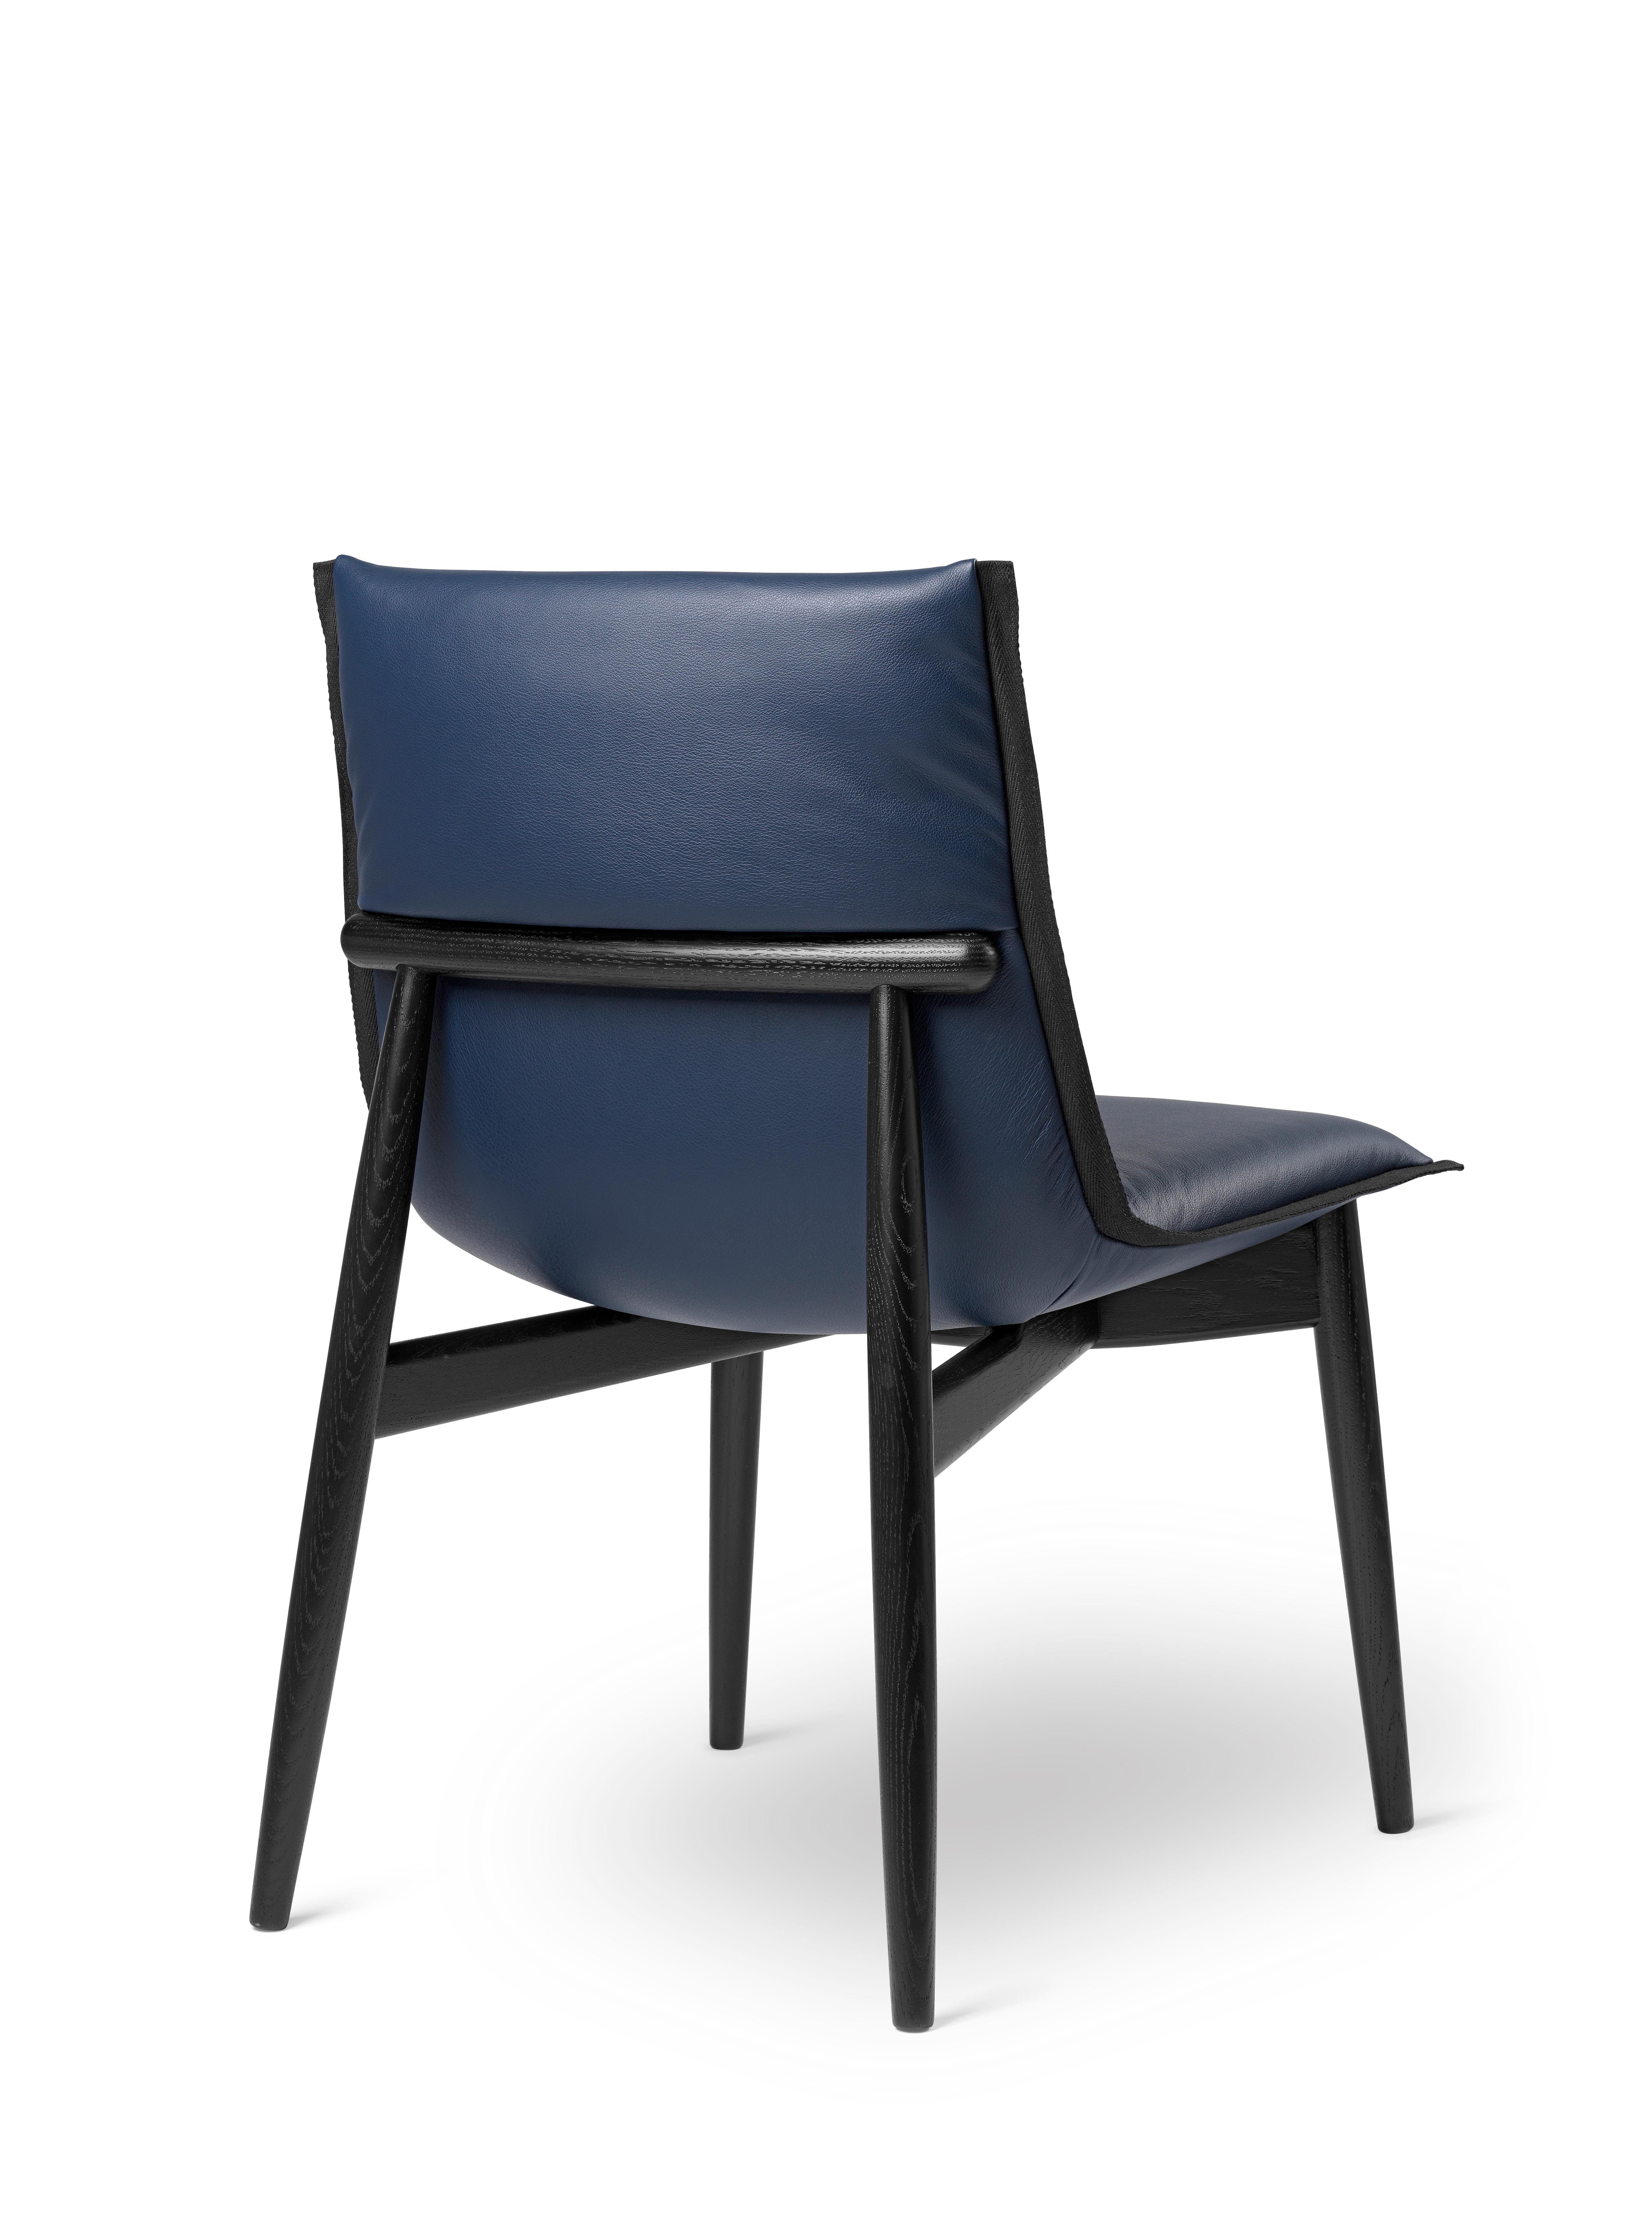 The Embrace chair is a 2019 addition to the Embrace Series by Austrian design trio EOOS. Visually light in its expression, the chair has no armrests and will take up less space, fitting with any table. The design allows for great freedom of